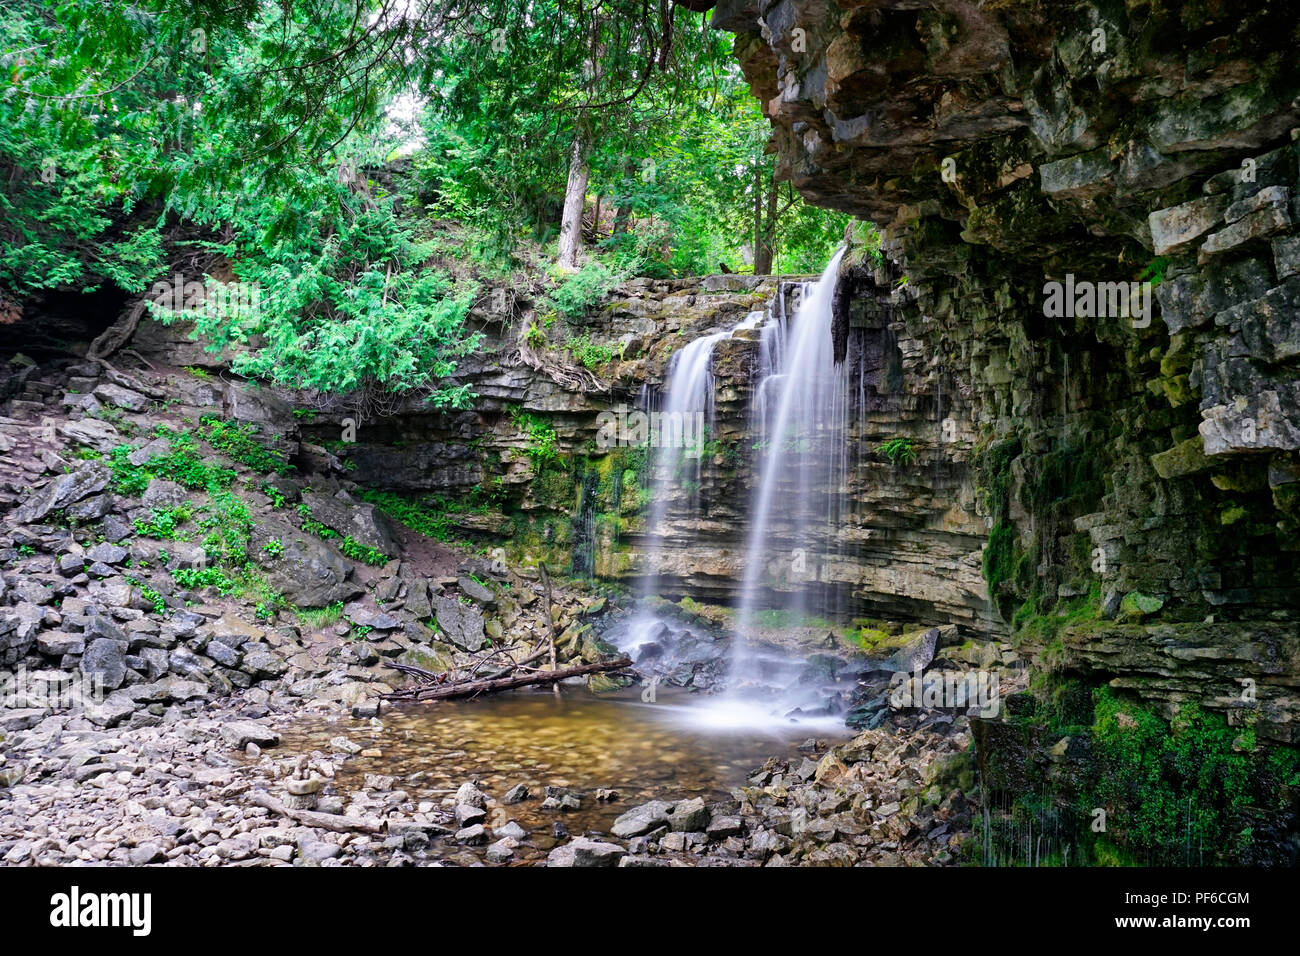 Waterfalls and green moss covered shale rock formation from Niagara Escarpment in Conservation Hilton,Milton, Ontario, Canada Stock Photo